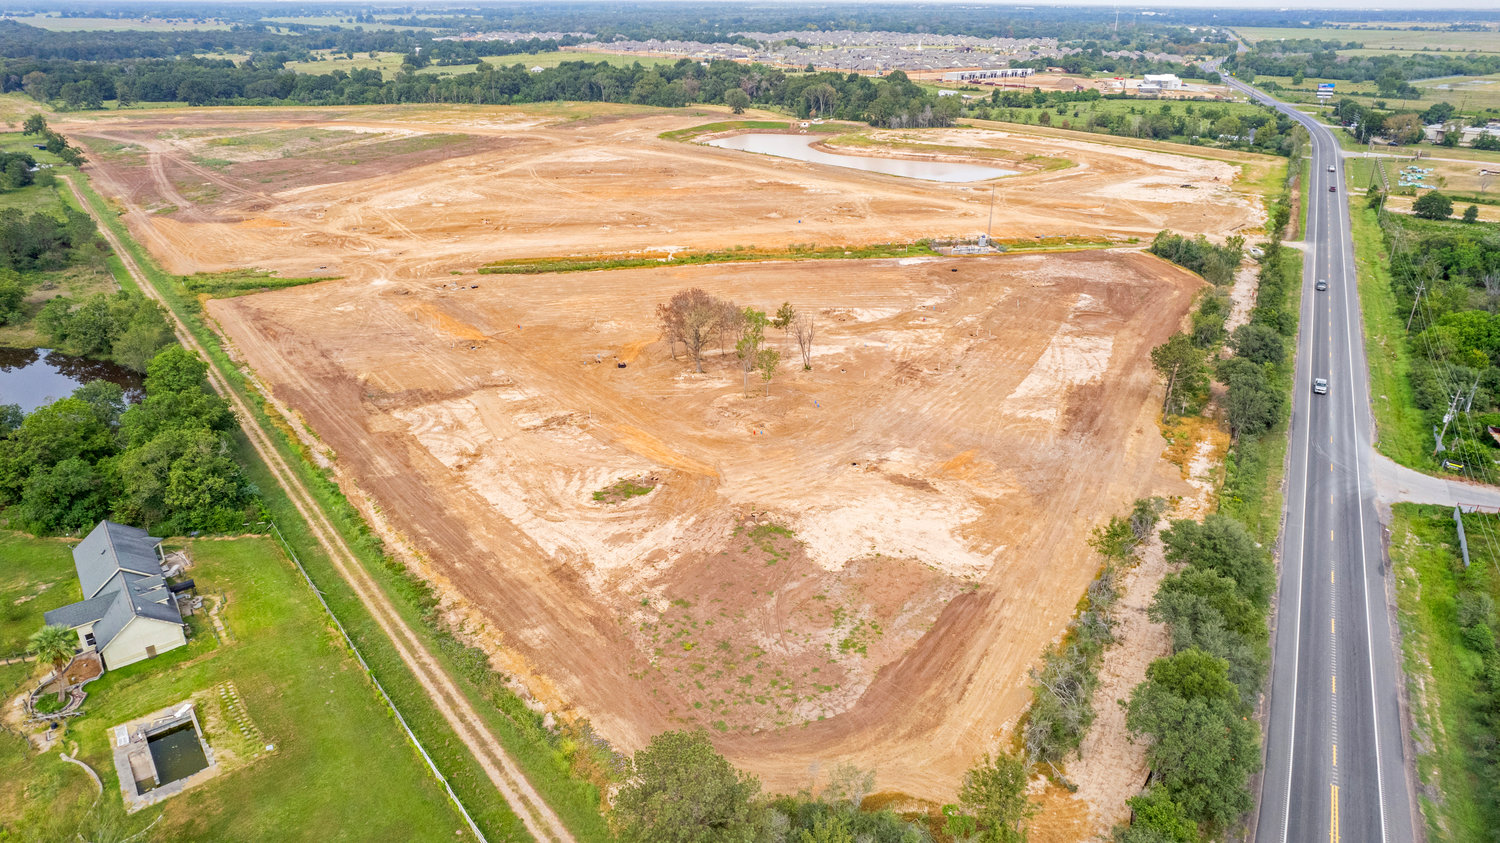 Work has begun on Summerview, a 175-acre residential development coming to Fulshear.